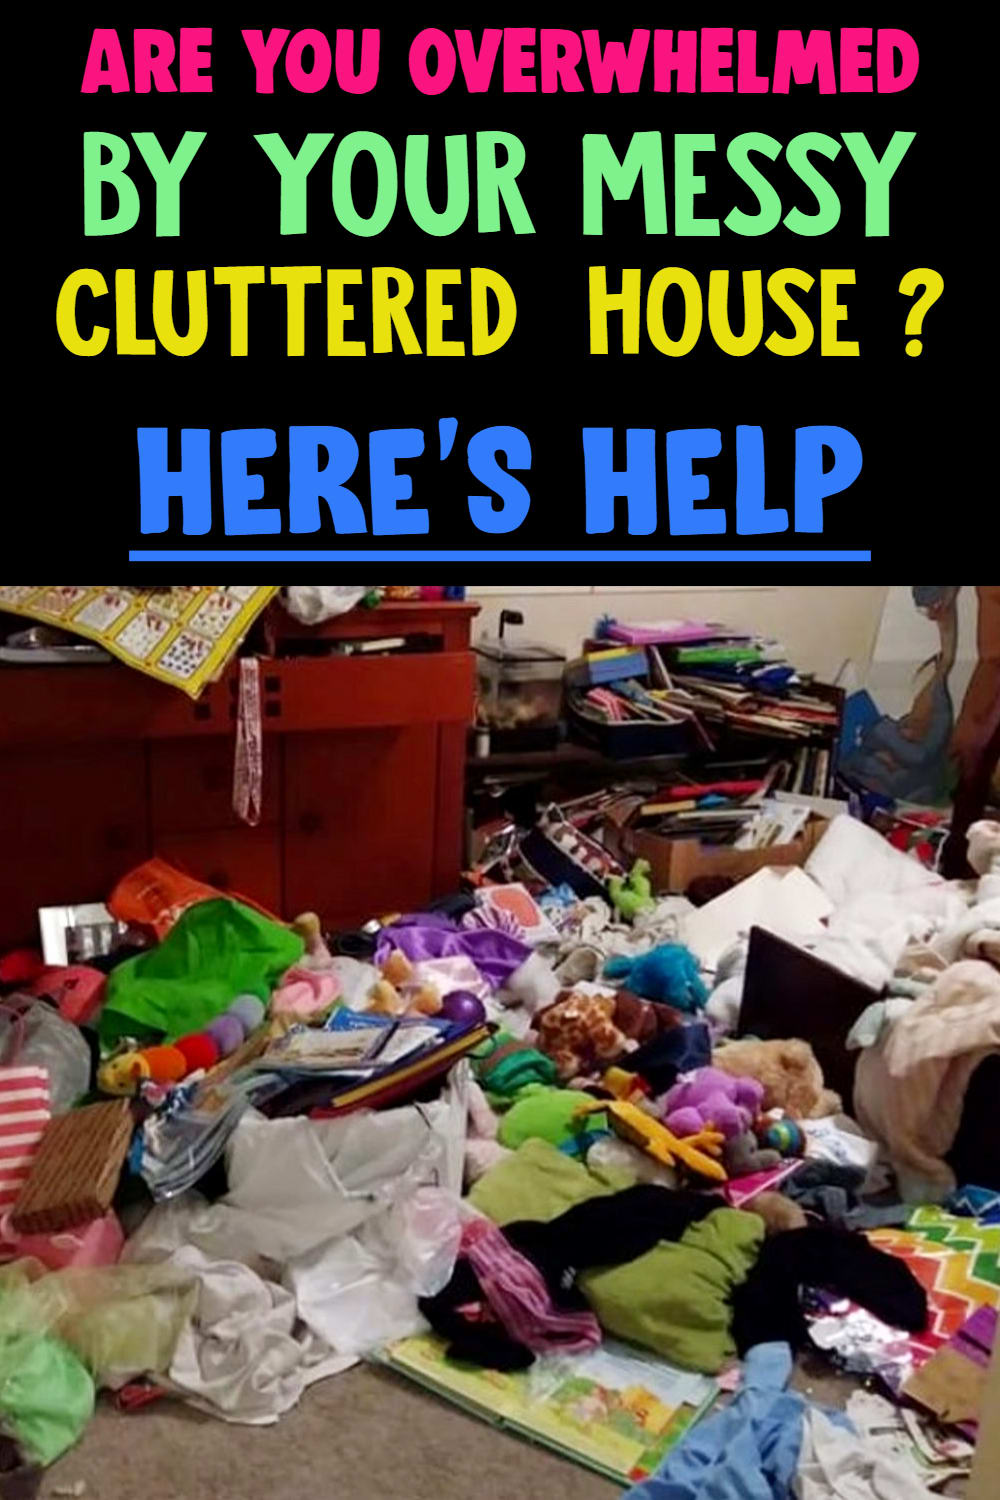 Cluttered House?  Overwhelmed by clutter and always thinking My House is a MESS?  If you're overwhelmed with cluttered house and overwhelmed by cleaning, learn how to start cleaning when overwhelmed with this cluttered house help even if you have a SUPER messy house.  Yes, it's decluttering for messy people who are overwhelmed by clutter and mess.  Remember, a cluttered house is a cluttered mind so get rid of clutter overwhelm like this...